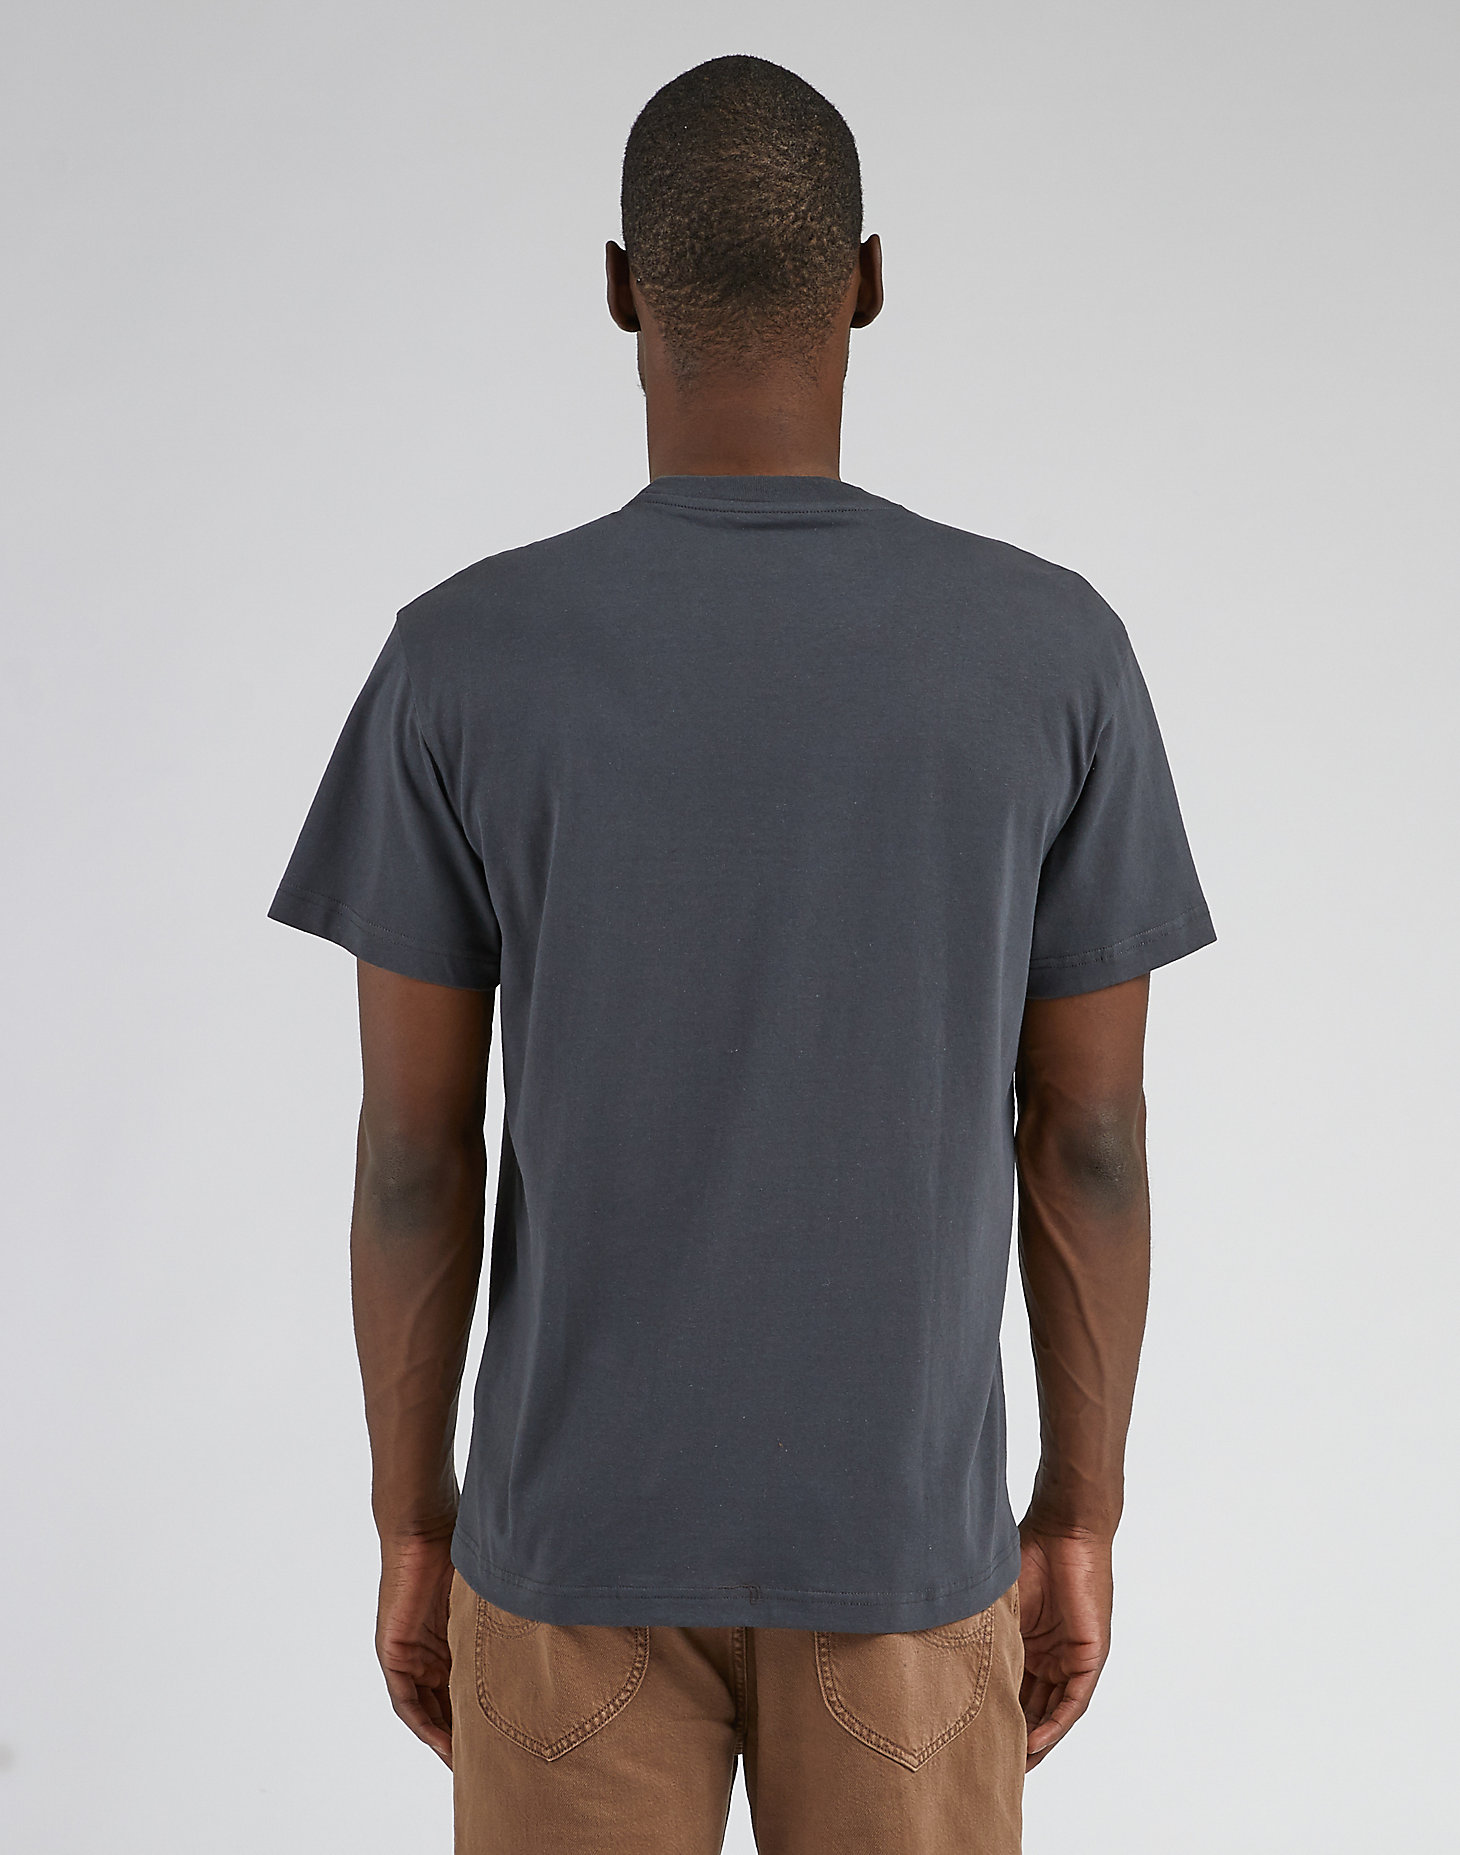 Short Sleeve Applique Tee in Washed Black alternative view 1